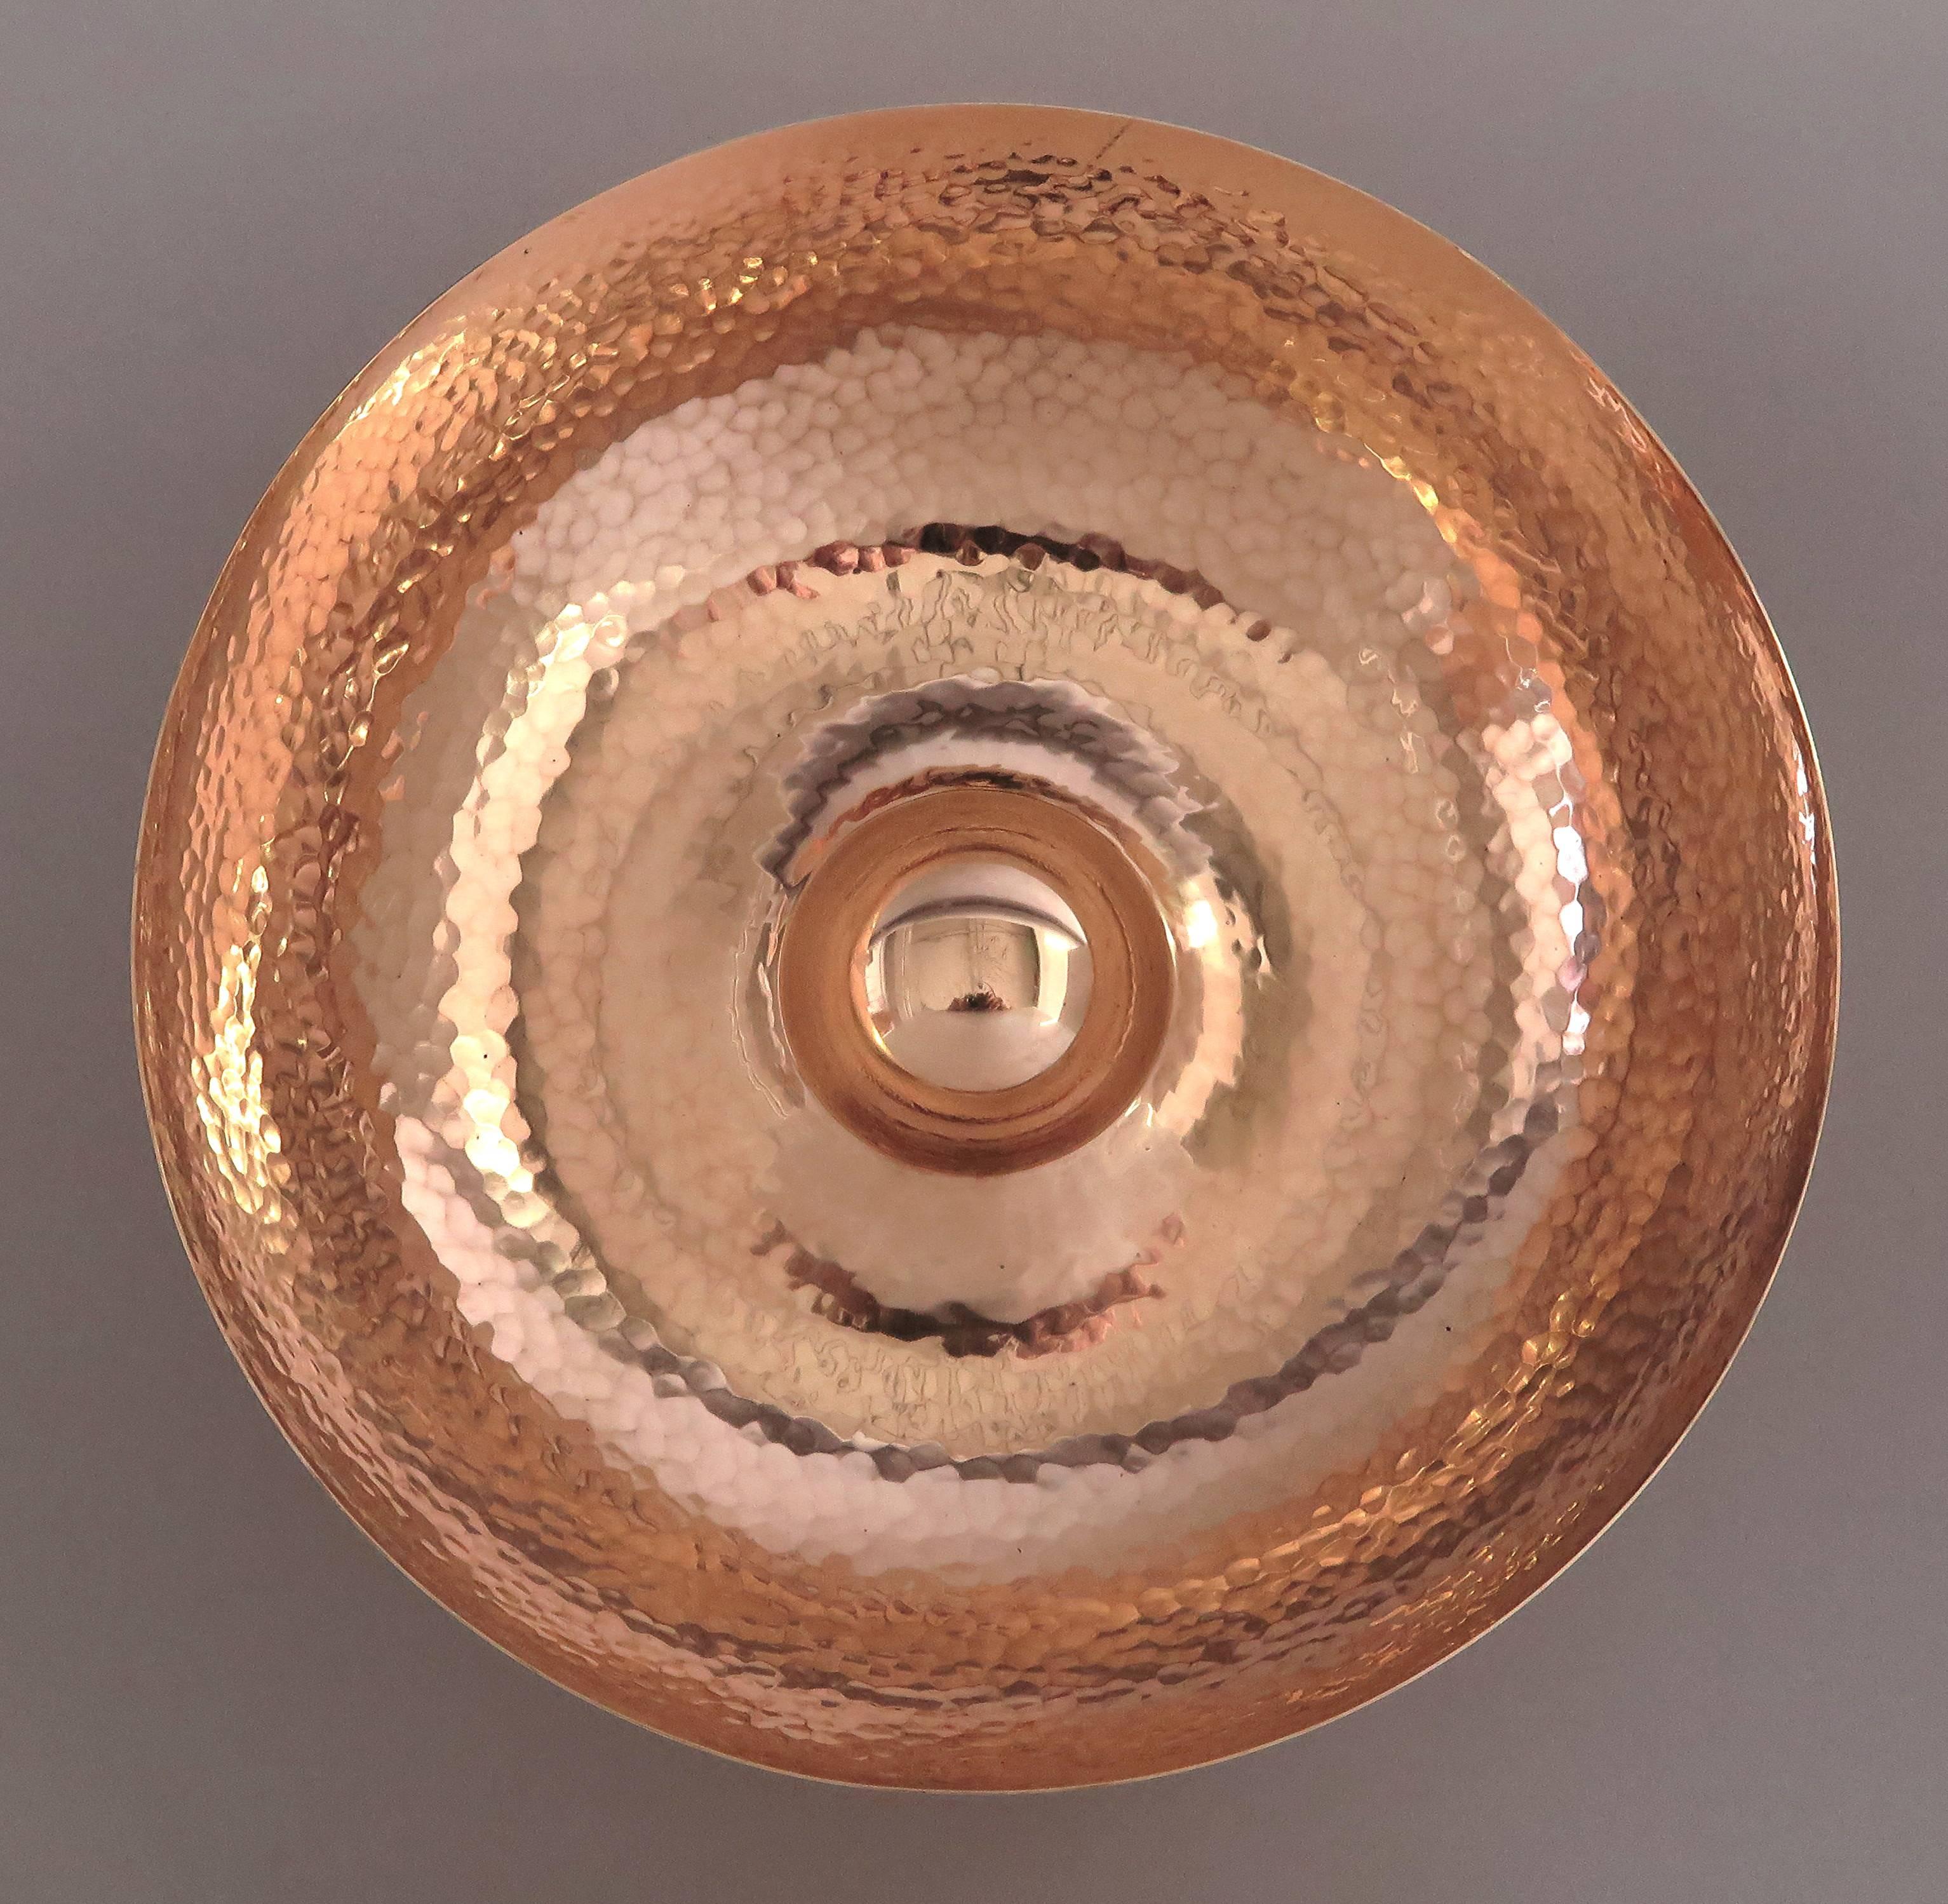 Two fantastic hand-hammered copper bowls designed by Tapio Wirkkala made by Kultakeskus, Finland, 1970s, embossed mark.
Dimensions:
ø 25 cm, height 6.8cm.
ø 19.5 cm, height 6.5cm.
   